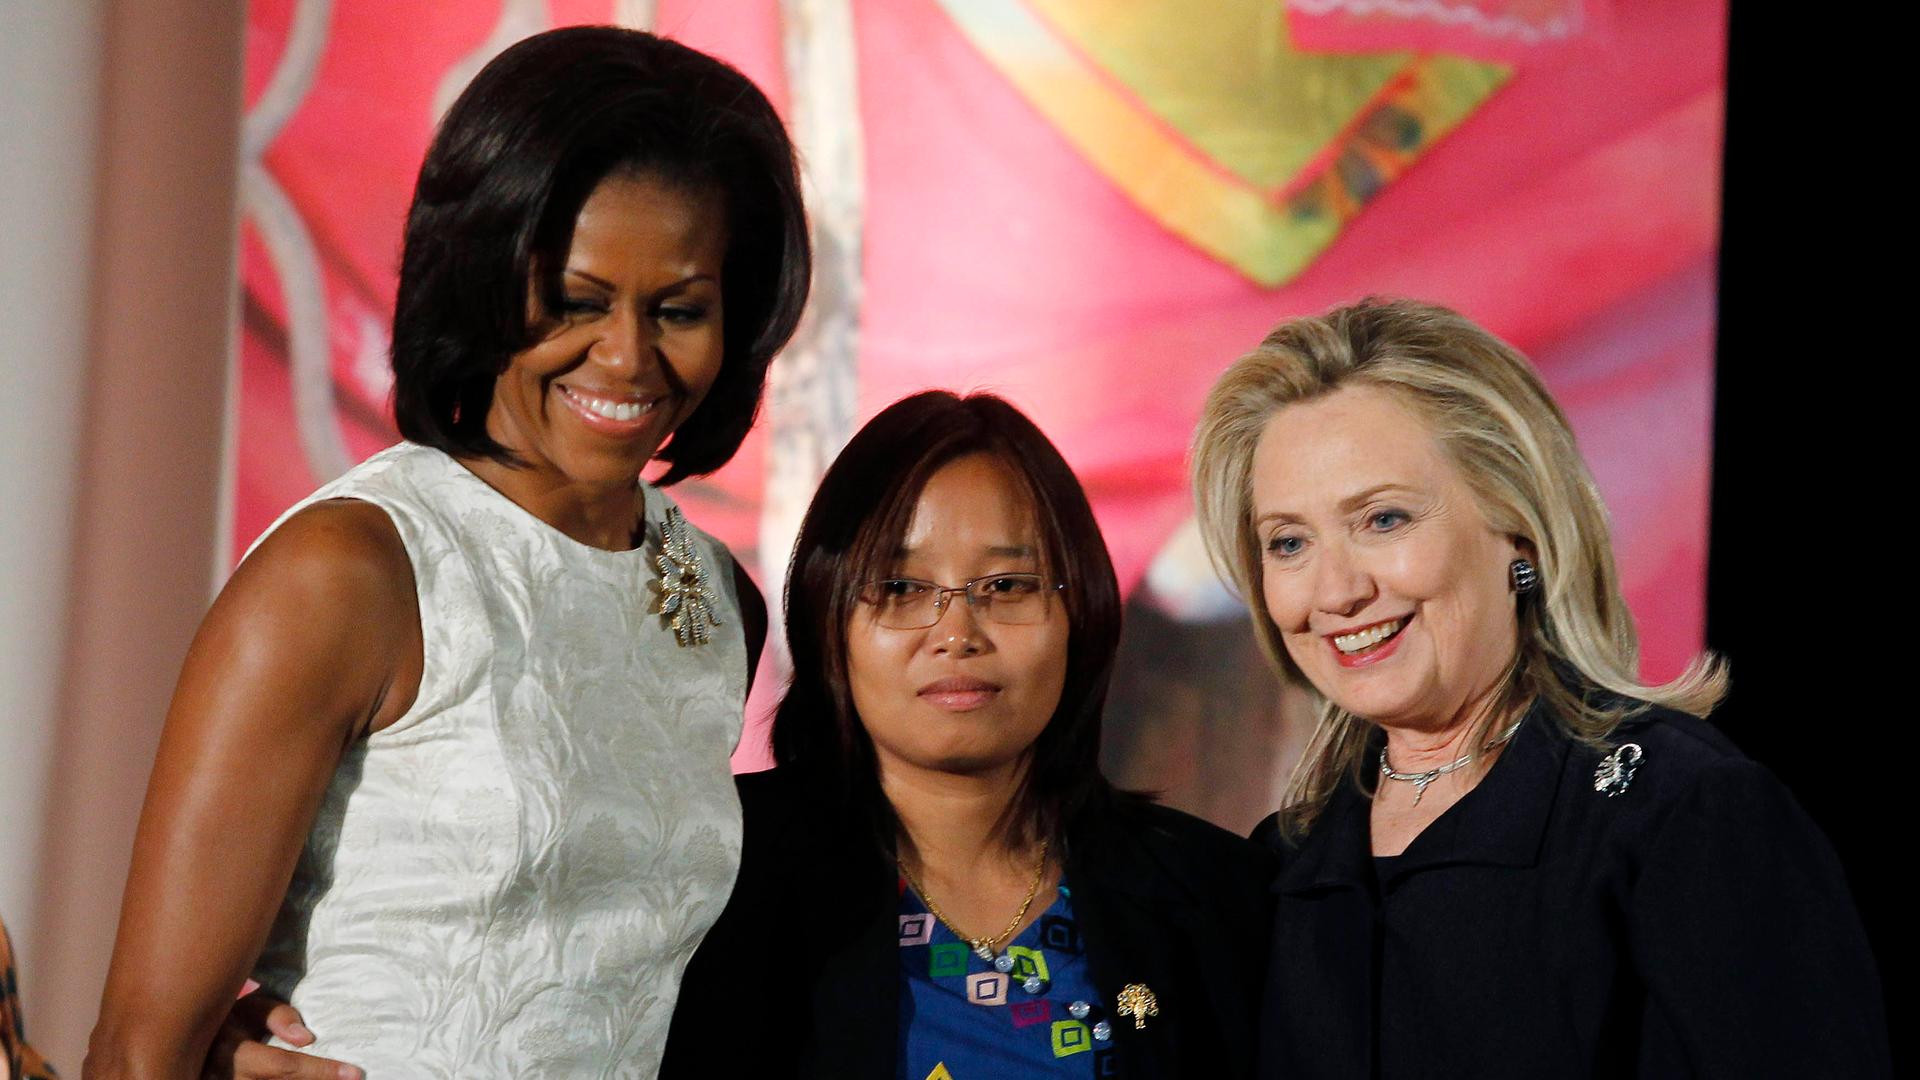 Zin Mar Aung of Myanmar (center) receives congratulations from First Lady Michelle Obama and U.S. Secretary of State Hillary Clinton as she receives a State Department 2012 International Women of Courage Award.